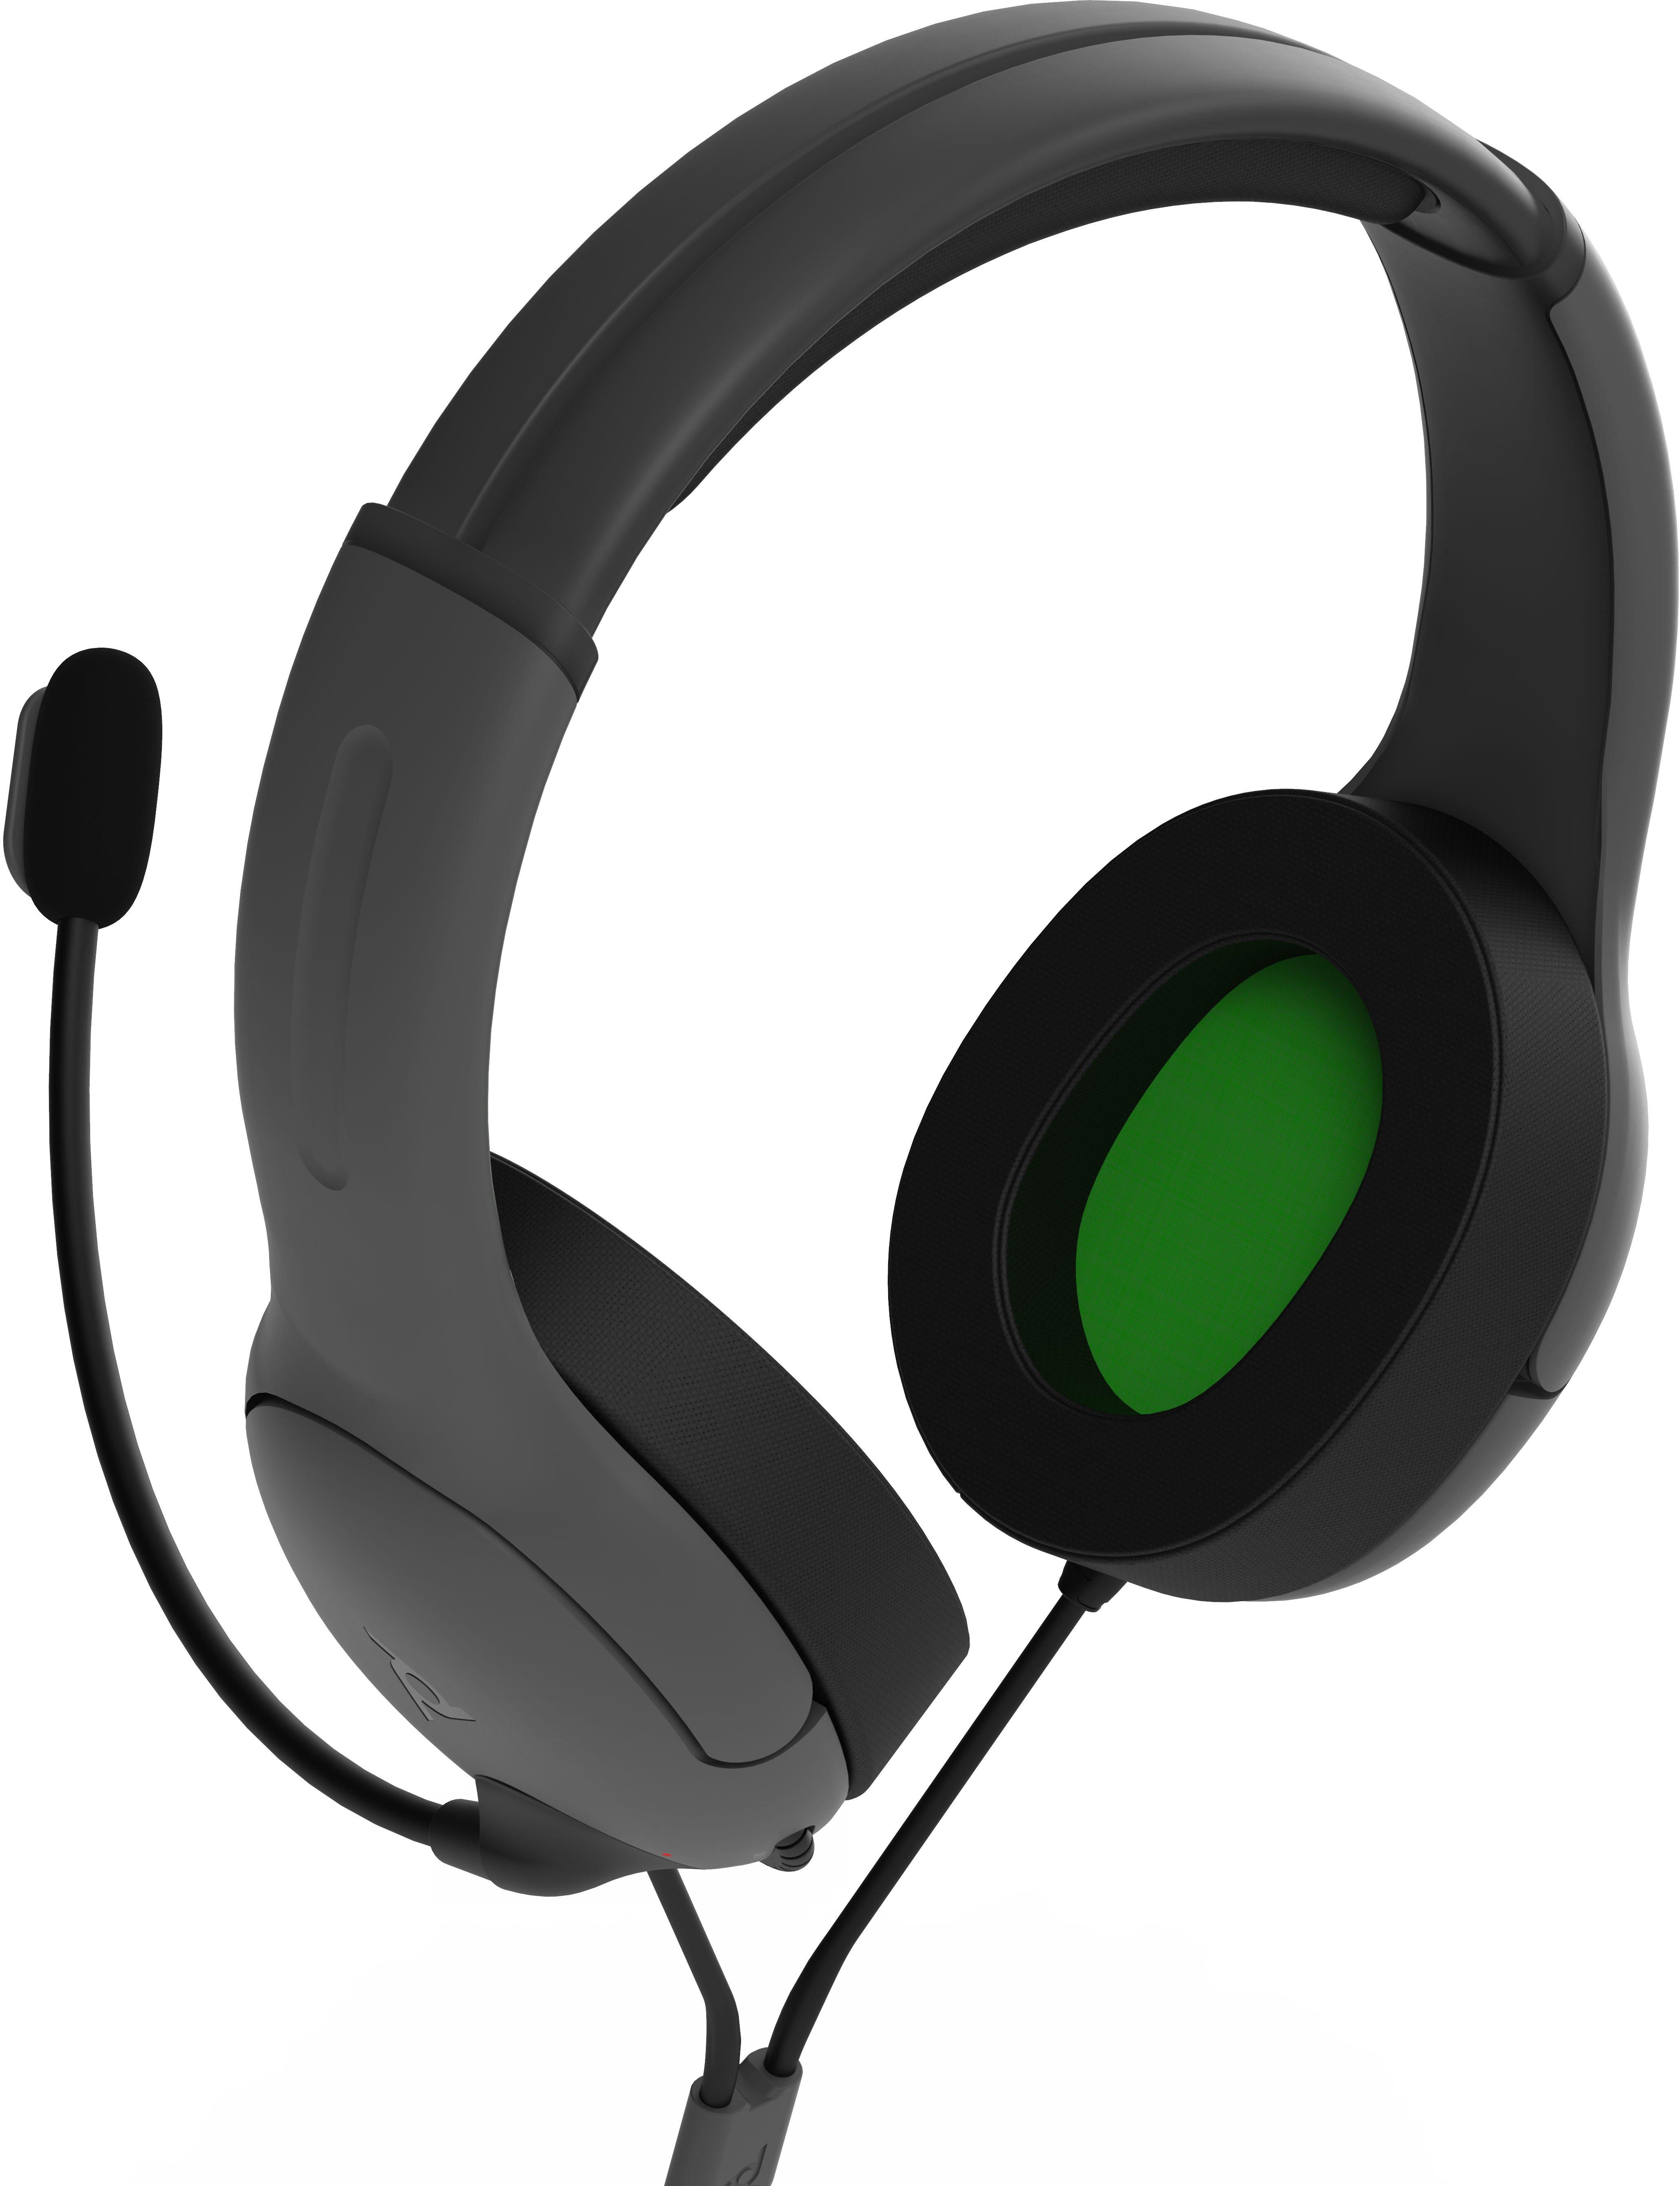 Pdp Gaming Lvl40 Stereo Casque avec Mic pour Xbox One, Series X